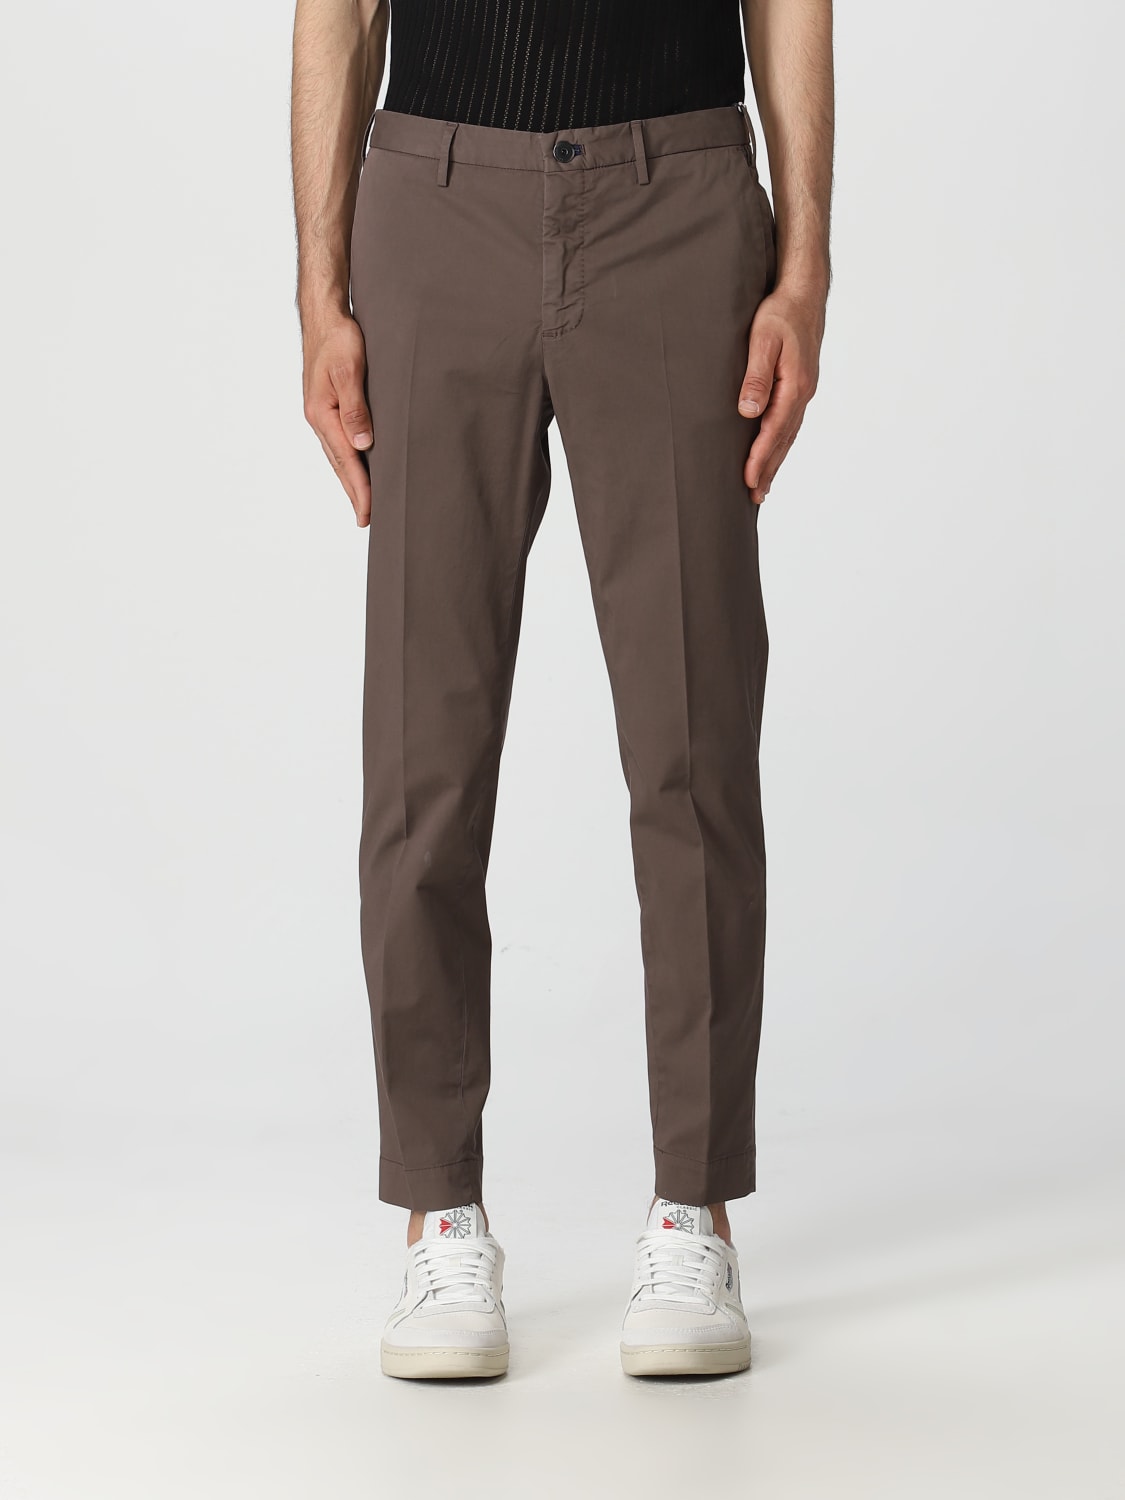 Incotex Outlet: pants for man - Brown | Incotex pants ZR851W9098Y